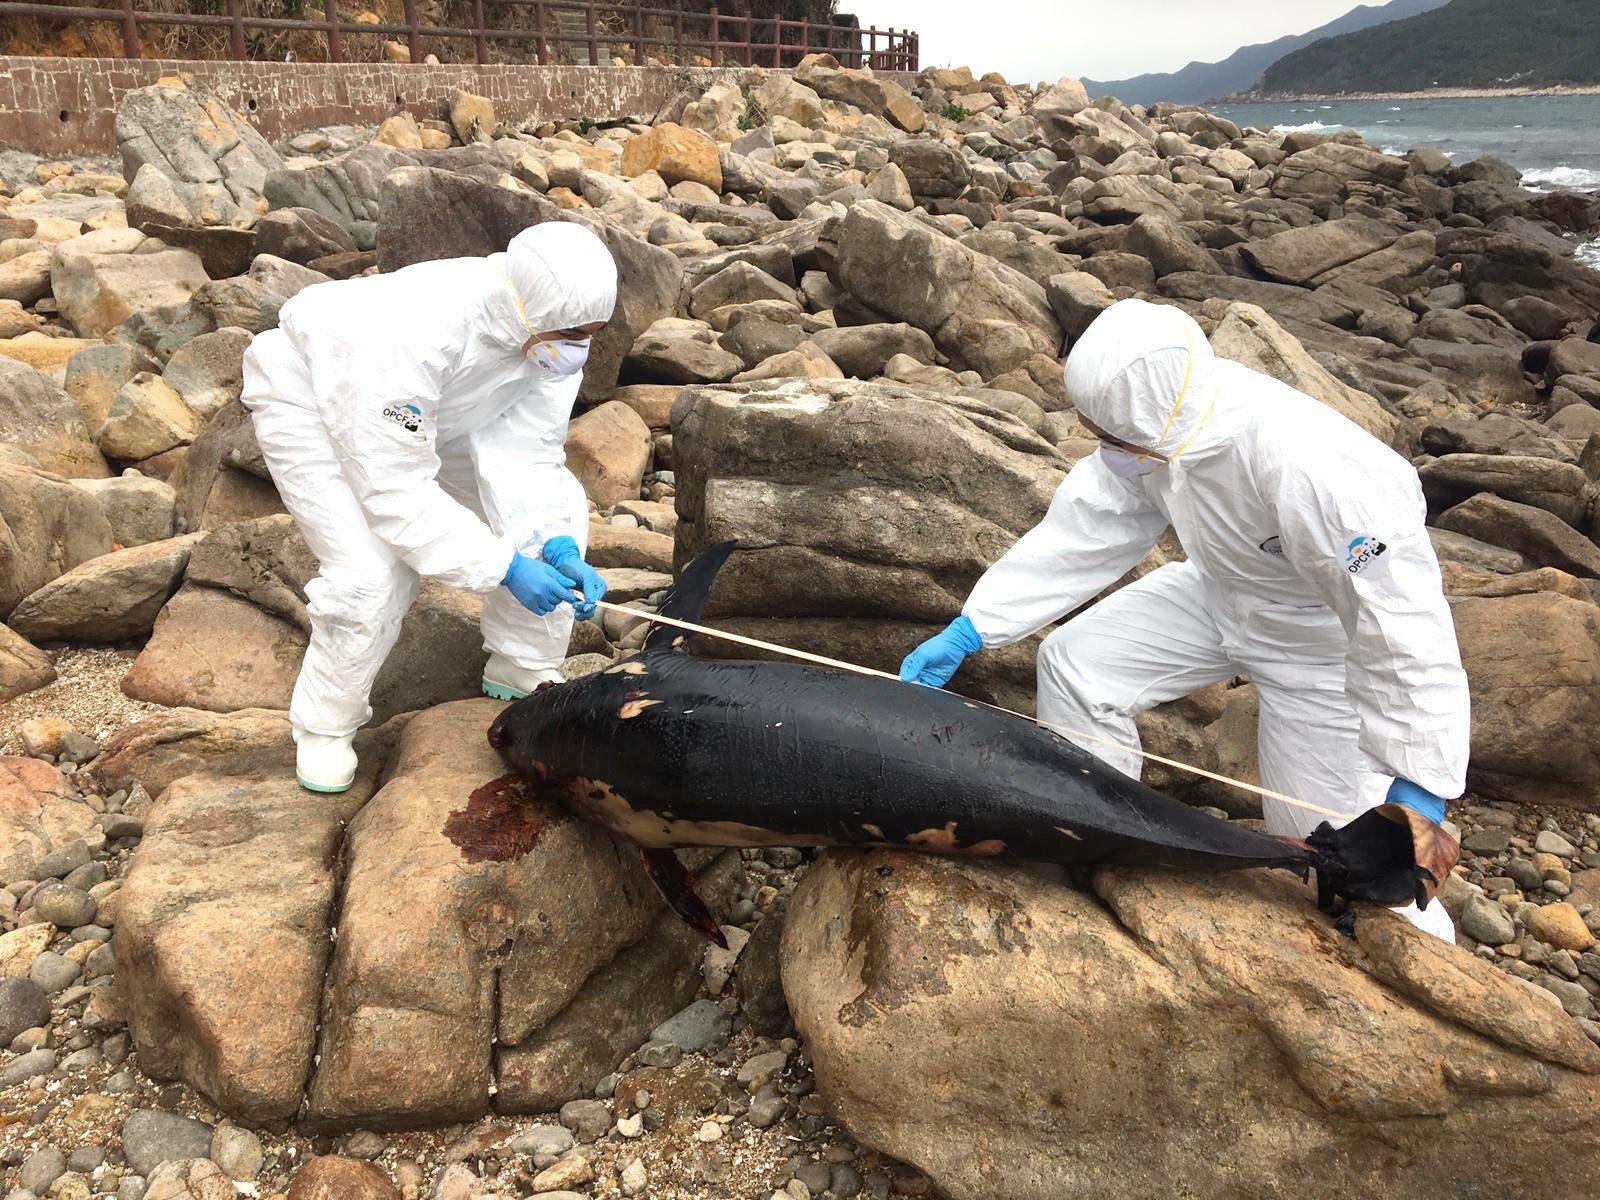 Members of the Ocean Park Conservation Foundation’s Cetacean Stranding Response Team measure the carcass of an adult male finless porpoise on Tap Mun island. Photo: Ocean Park Conservation Foundation, Hong Kong